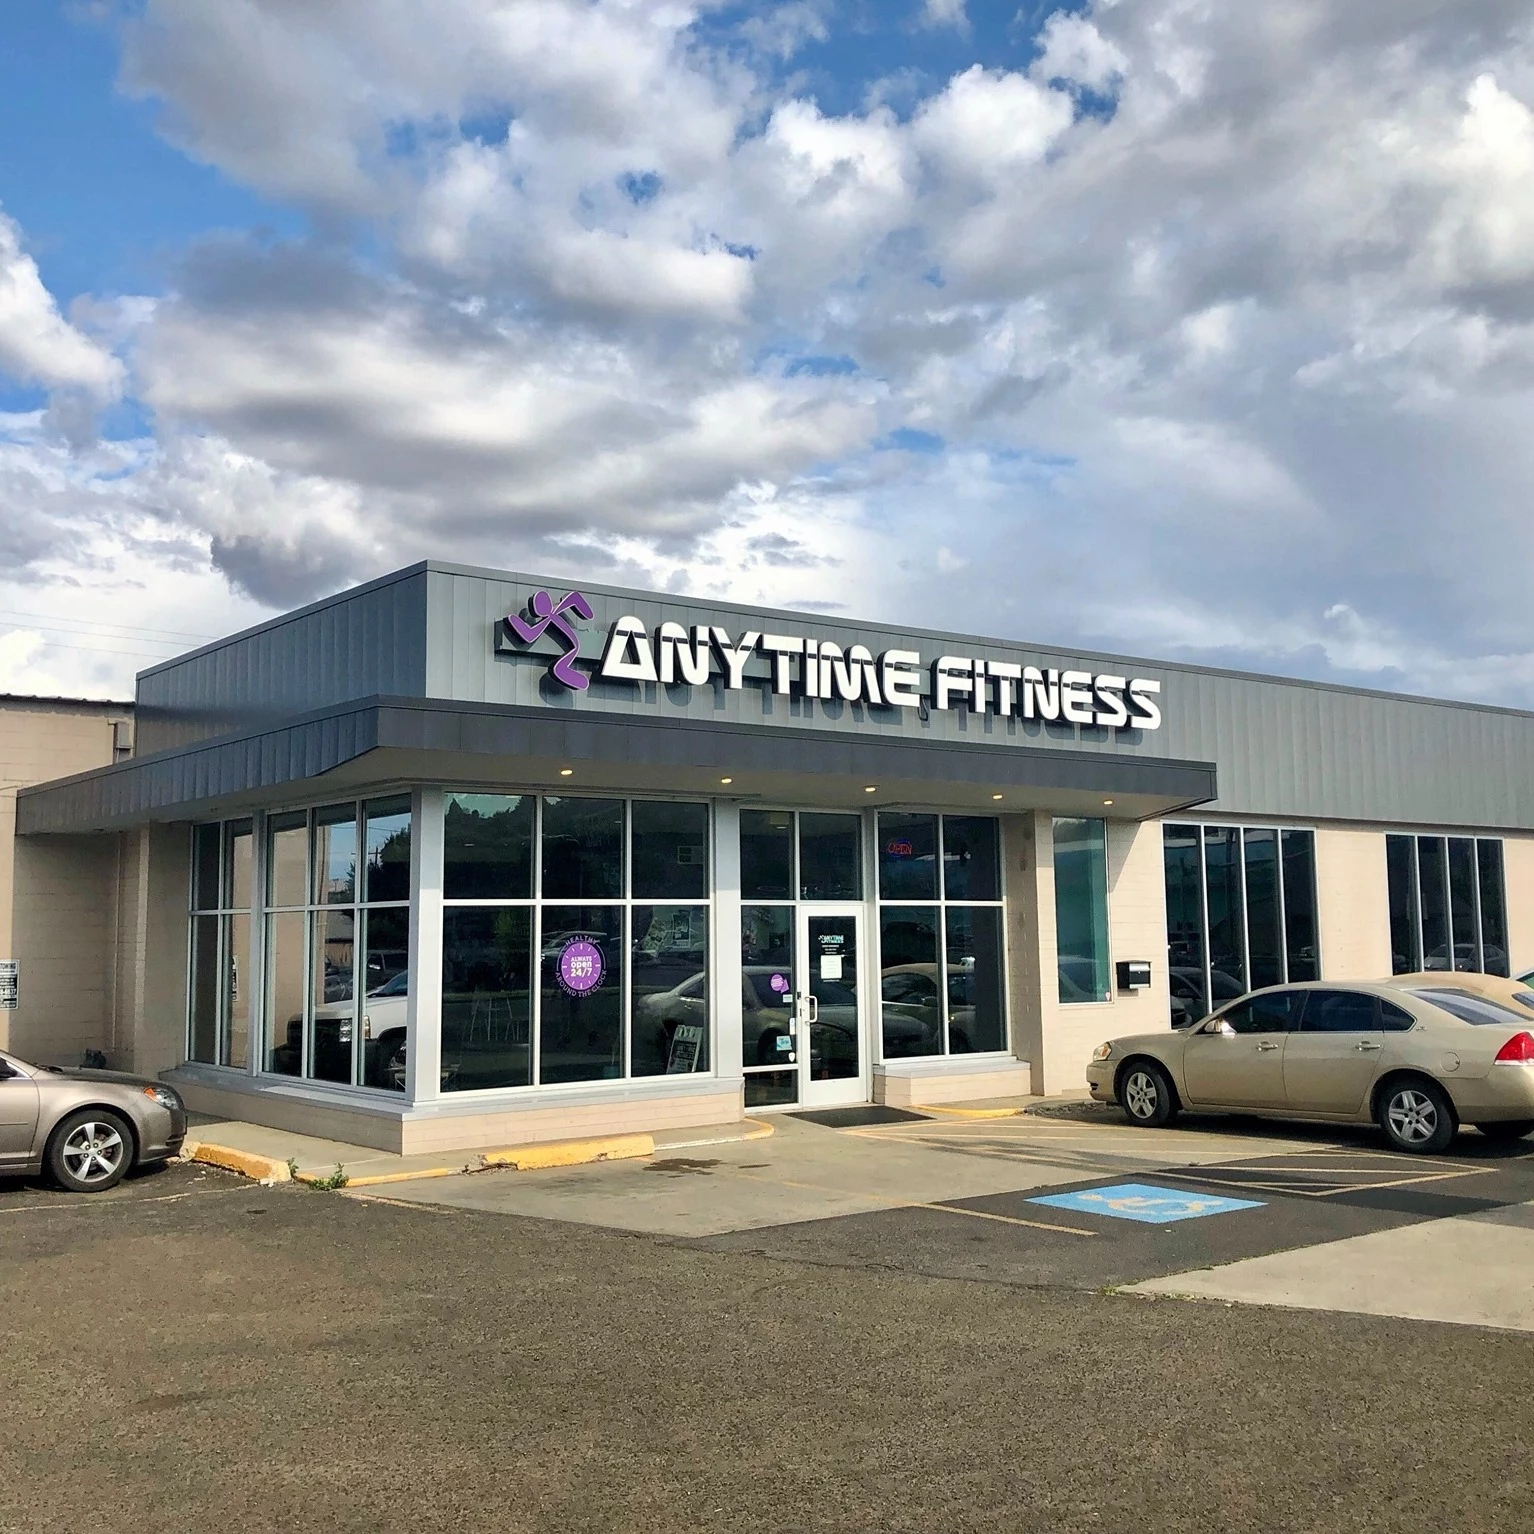 anytime fitness staffed hours